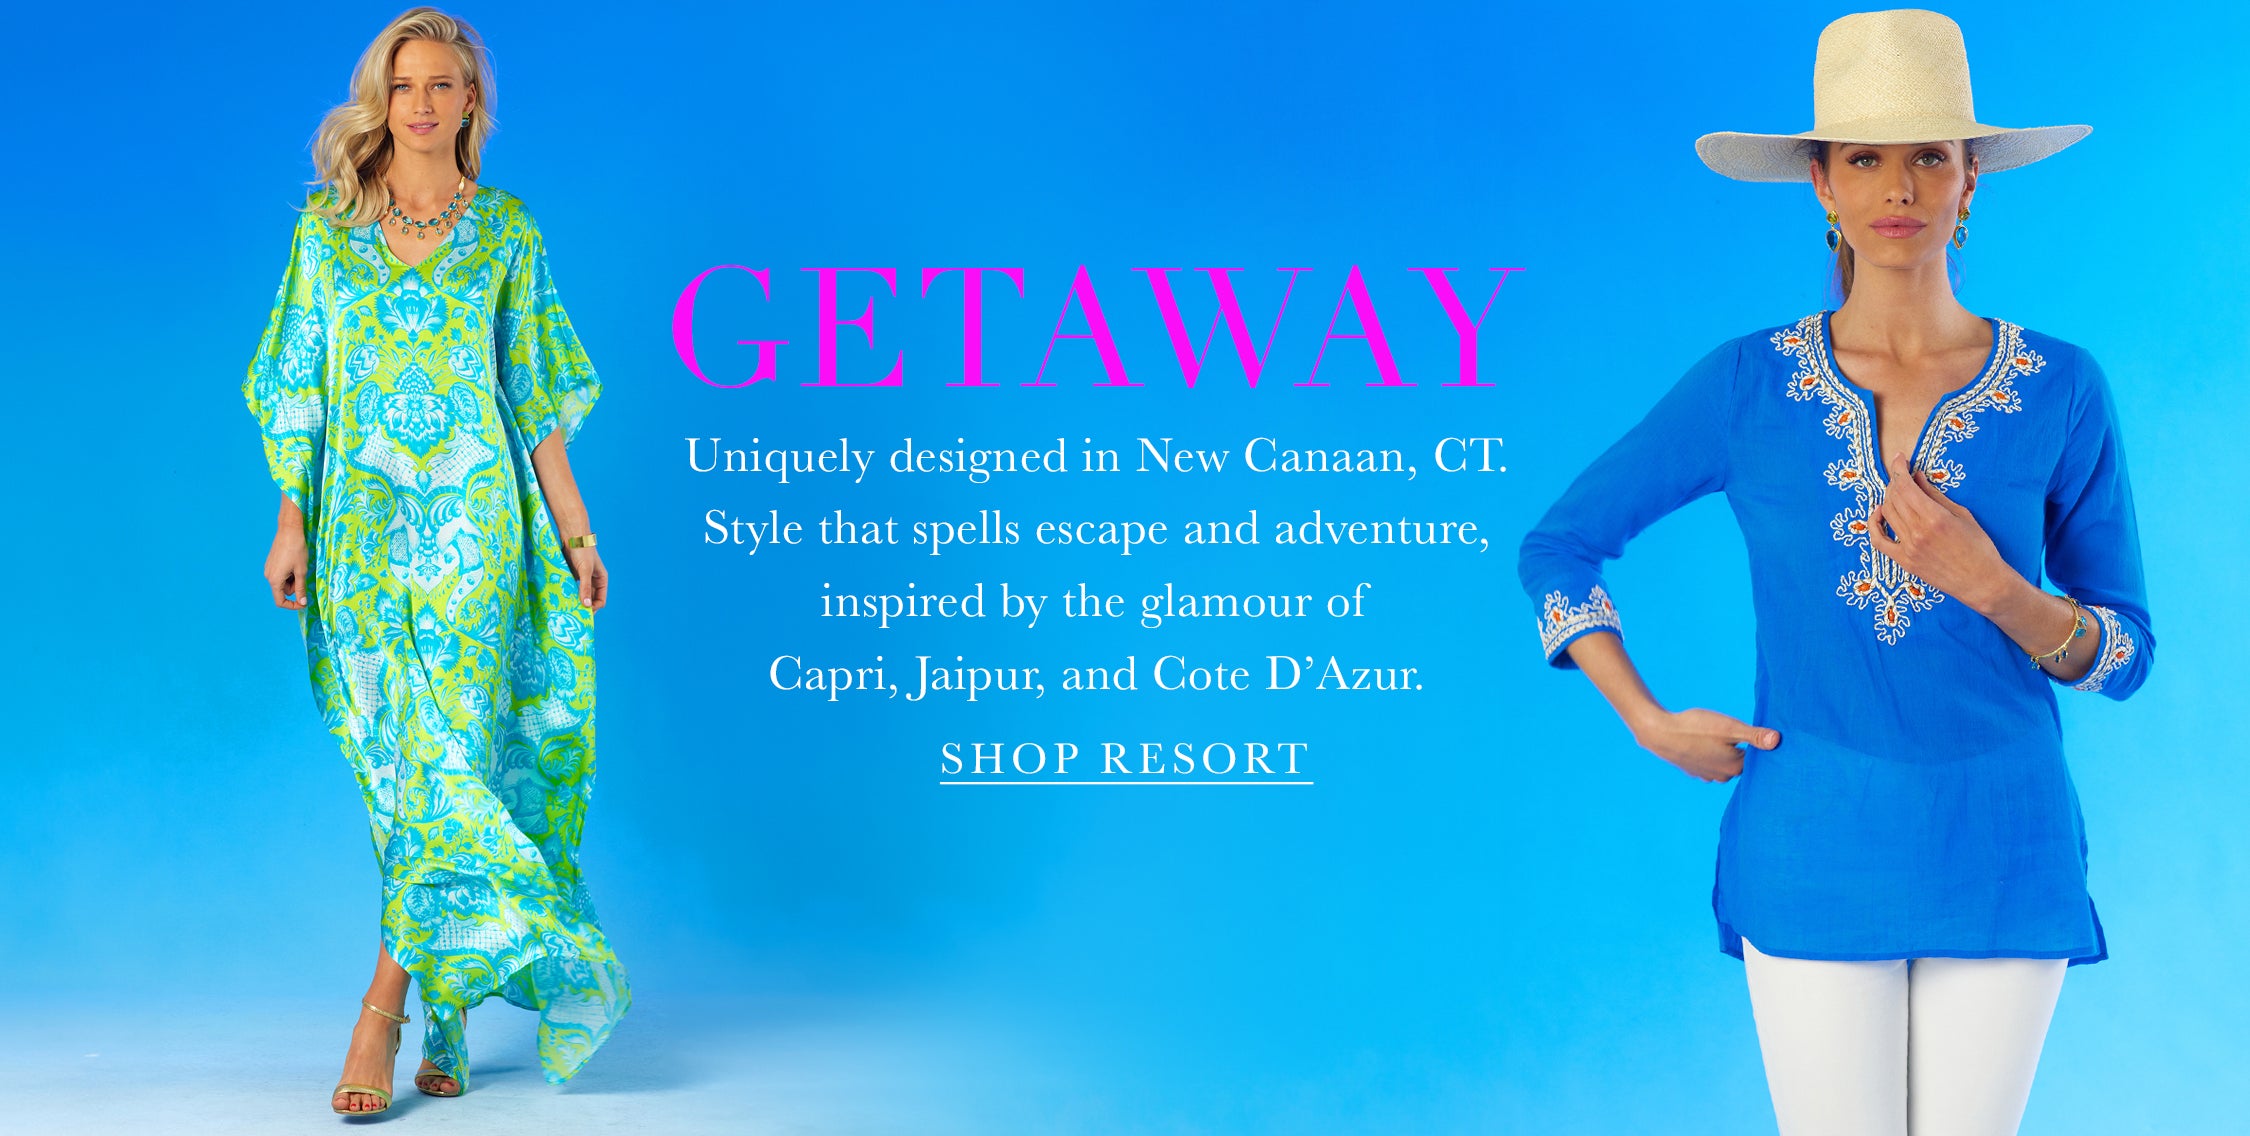 Unique and exquisite pieces  that spell escape and adventure. Click to shop resort styles.